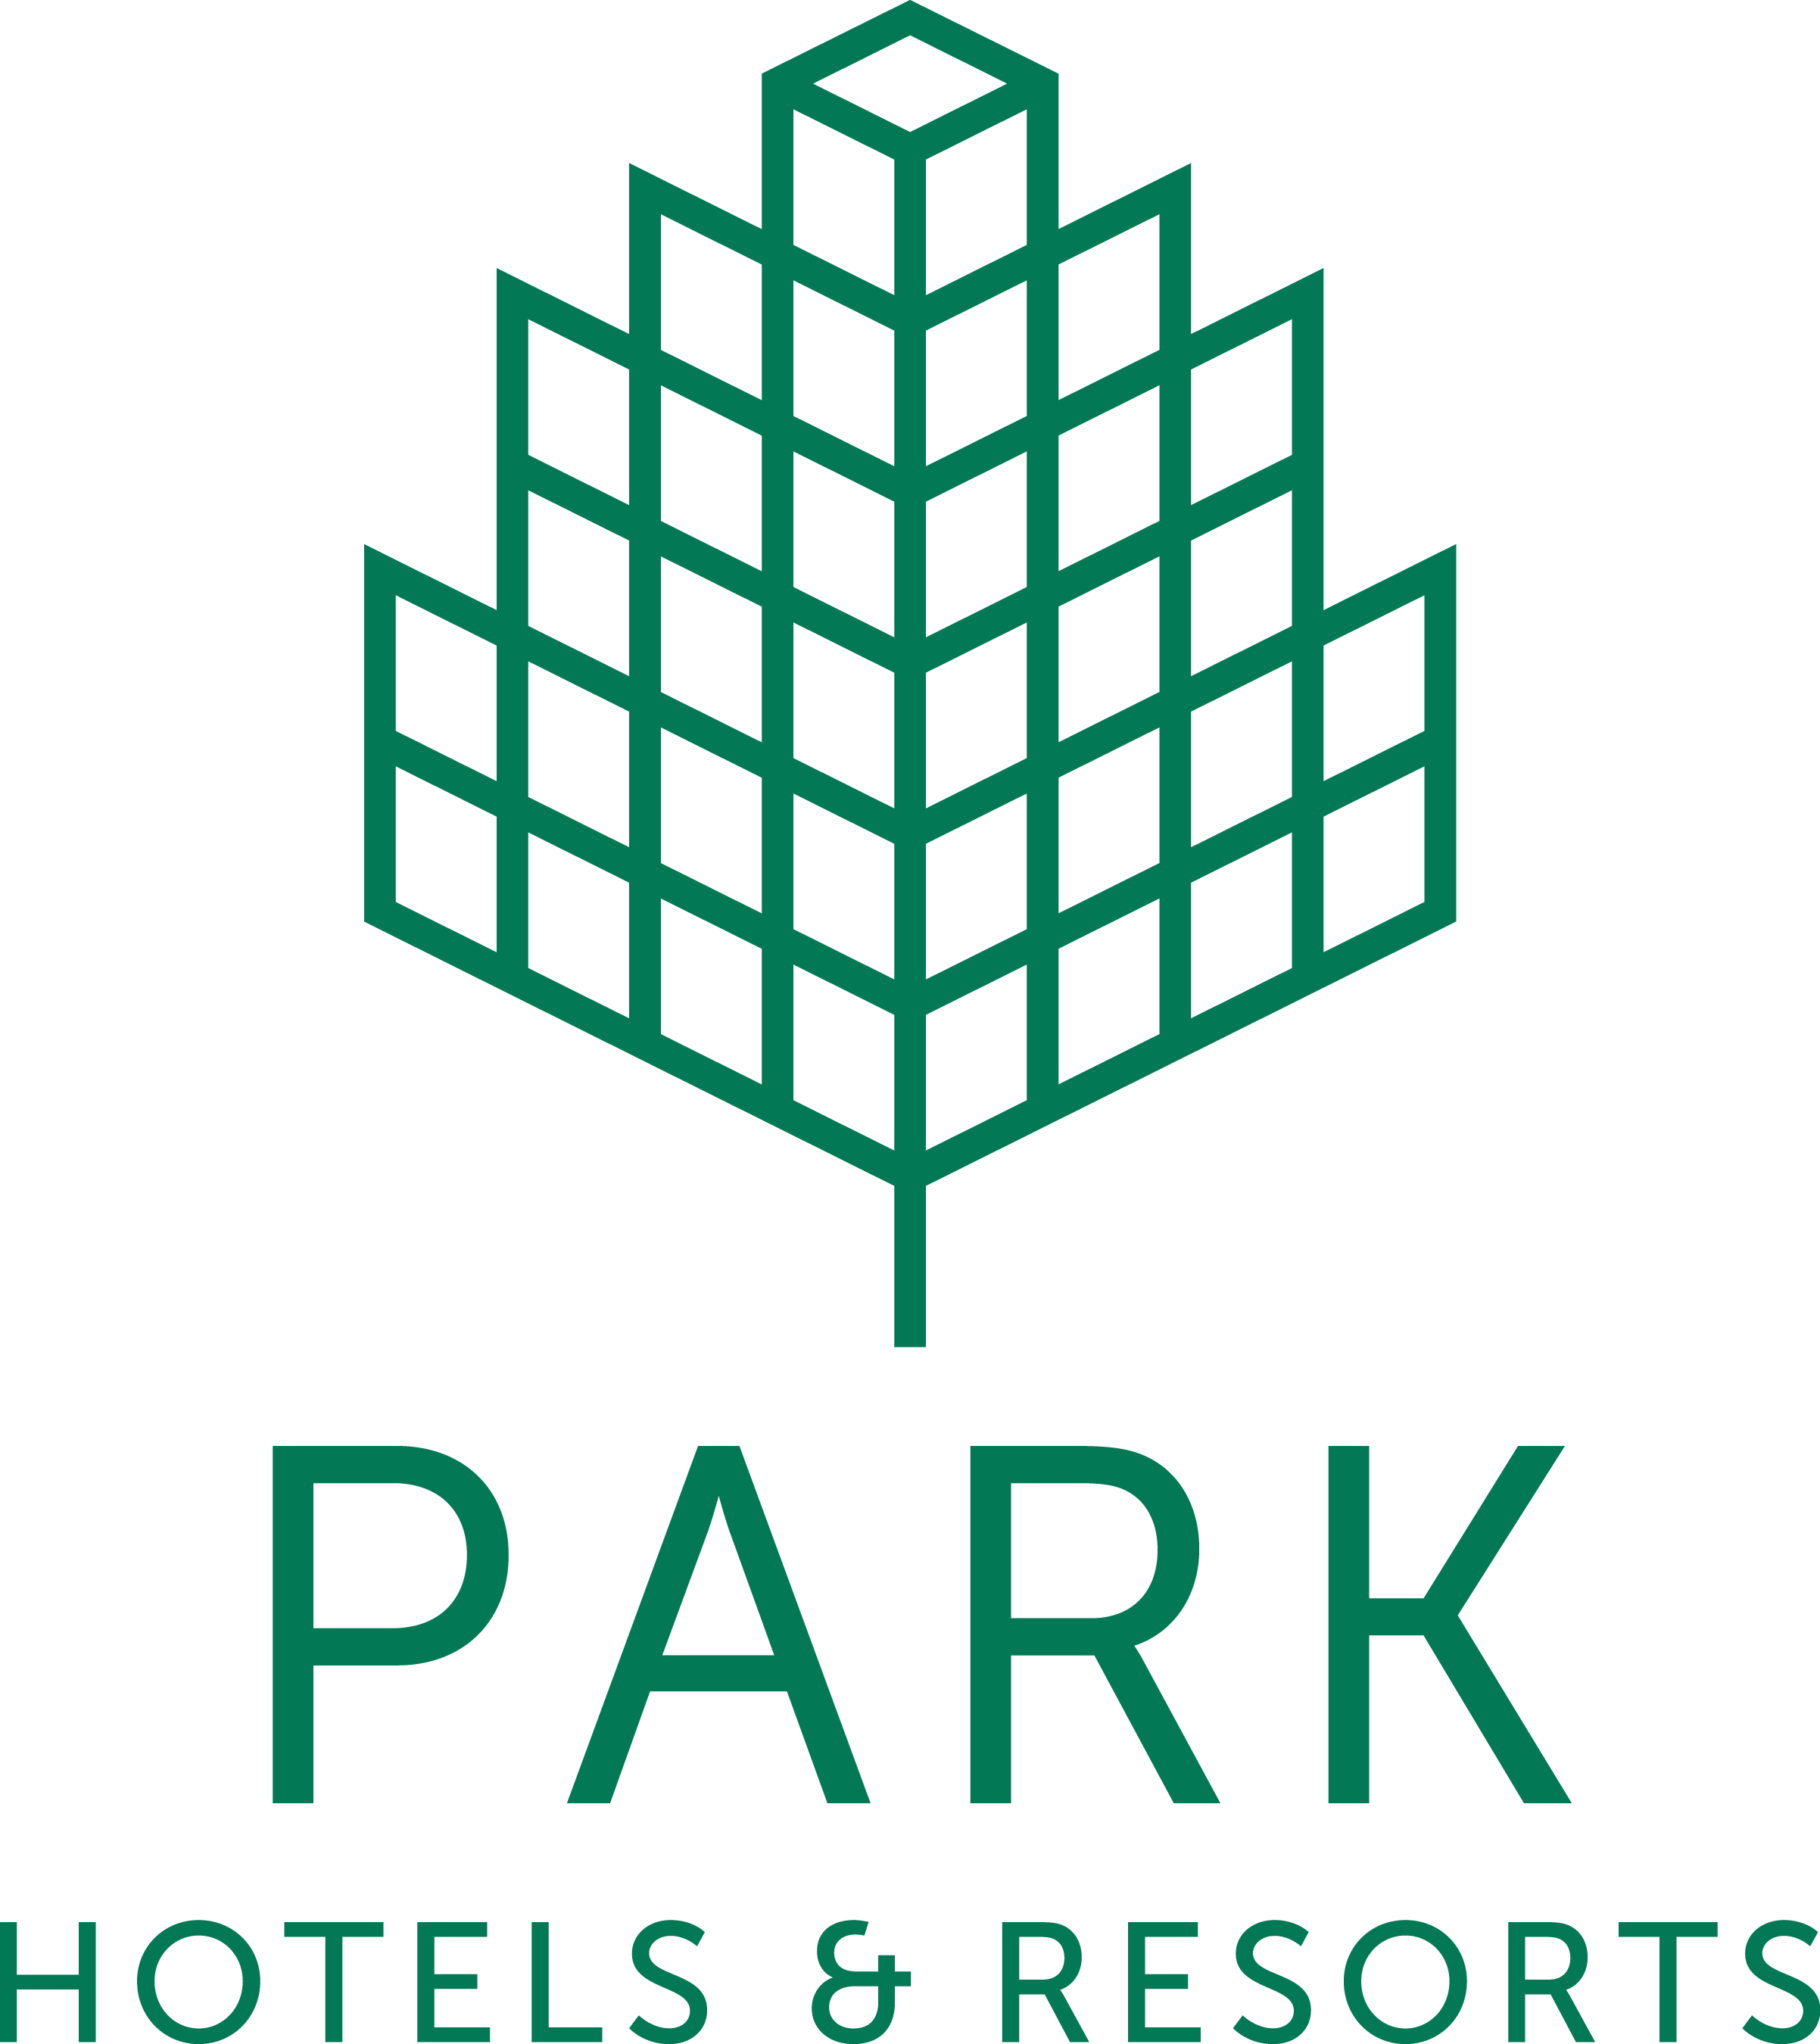 Park Hotels & Resorts Inc. Awarded Nareit’s 2023 Leader in the Light Award for its Sustainability Practices